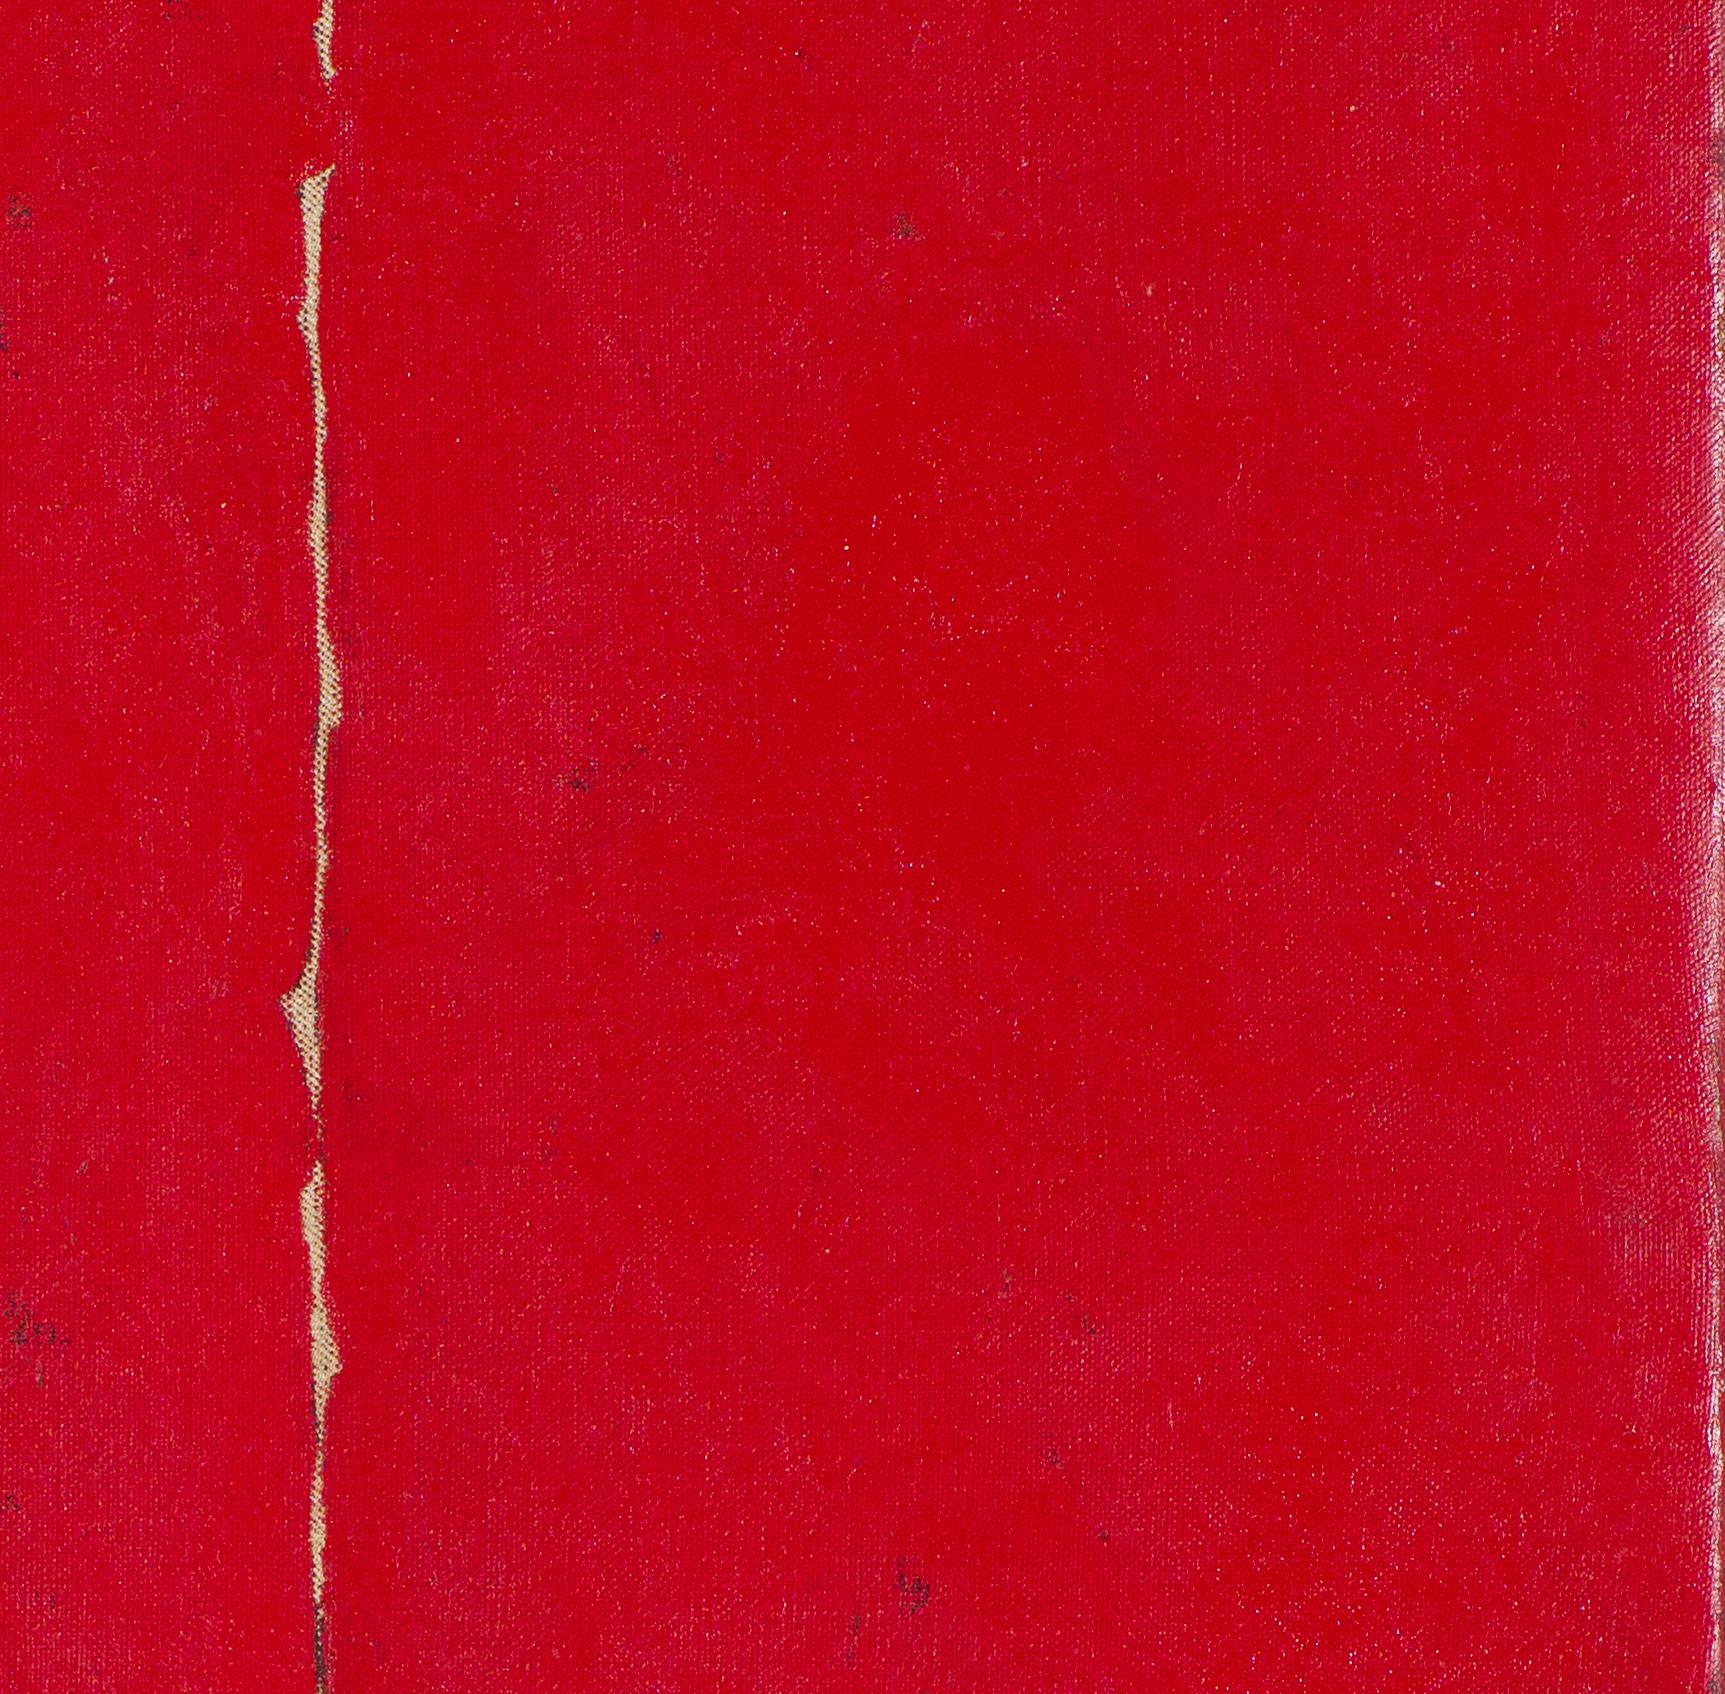 1978 (red) - Abstract Painting by Mala Breuer